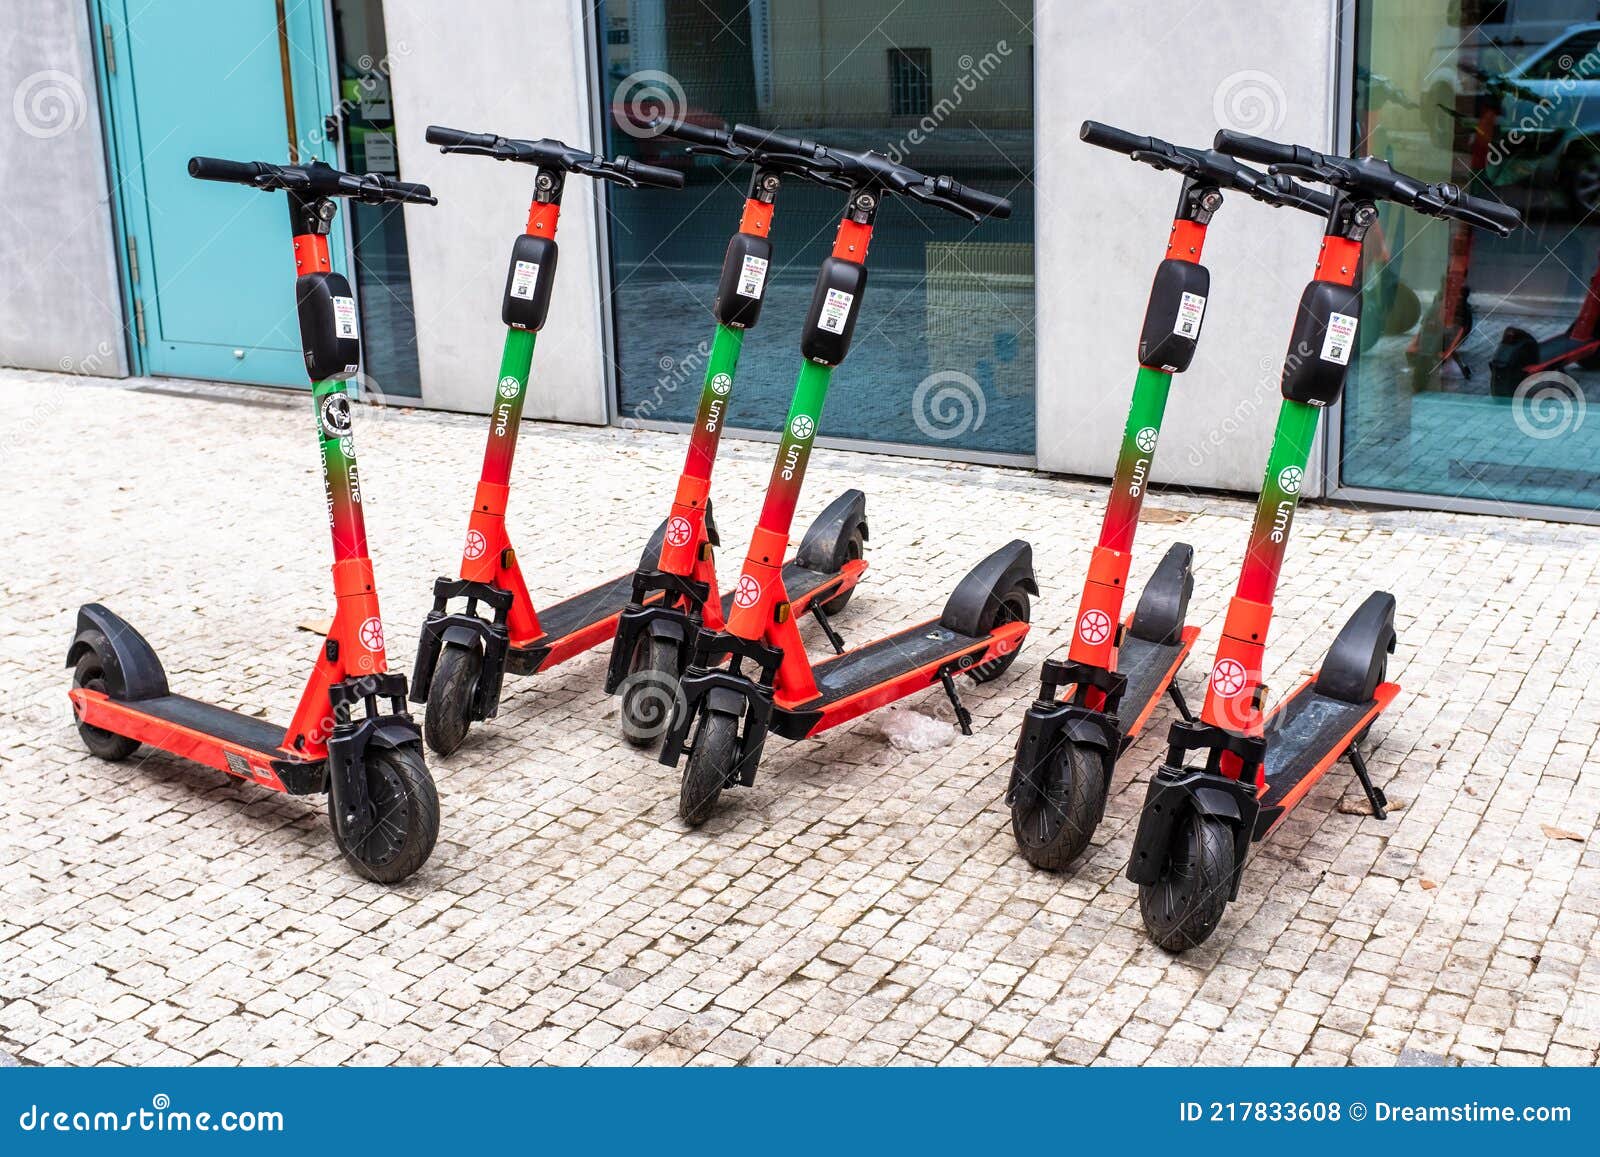 Group of the Lime Uber Shared Scooters Parked on the of the Karlin District in Prague Editorial Stock Photo - of parked, 217833608